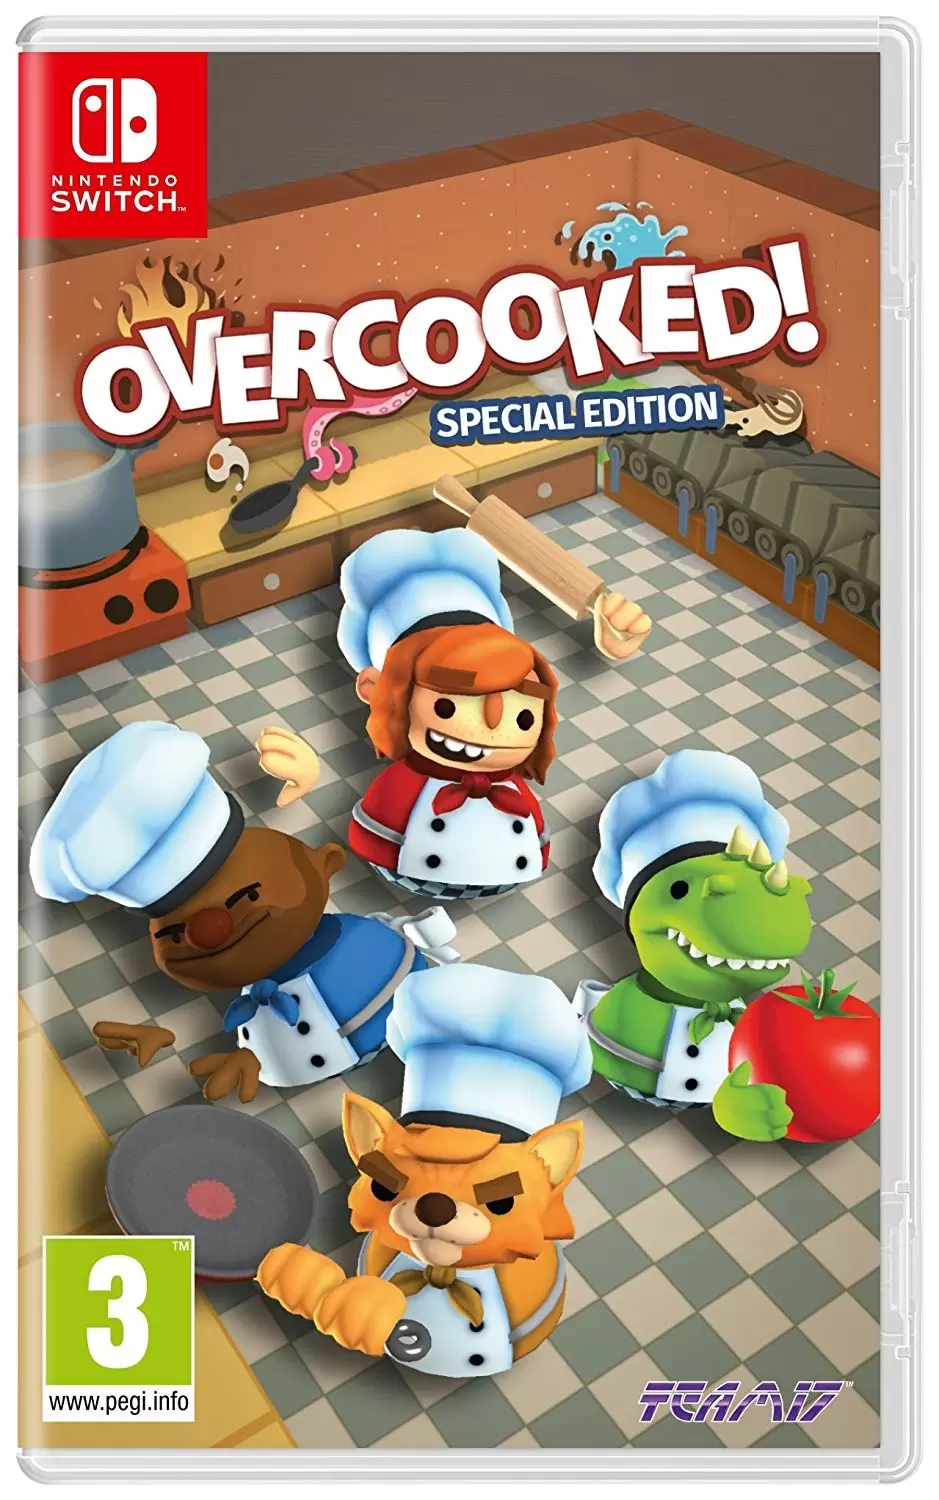 Jeux Nintendo Switch - Overcooked ! Edition Spéciale